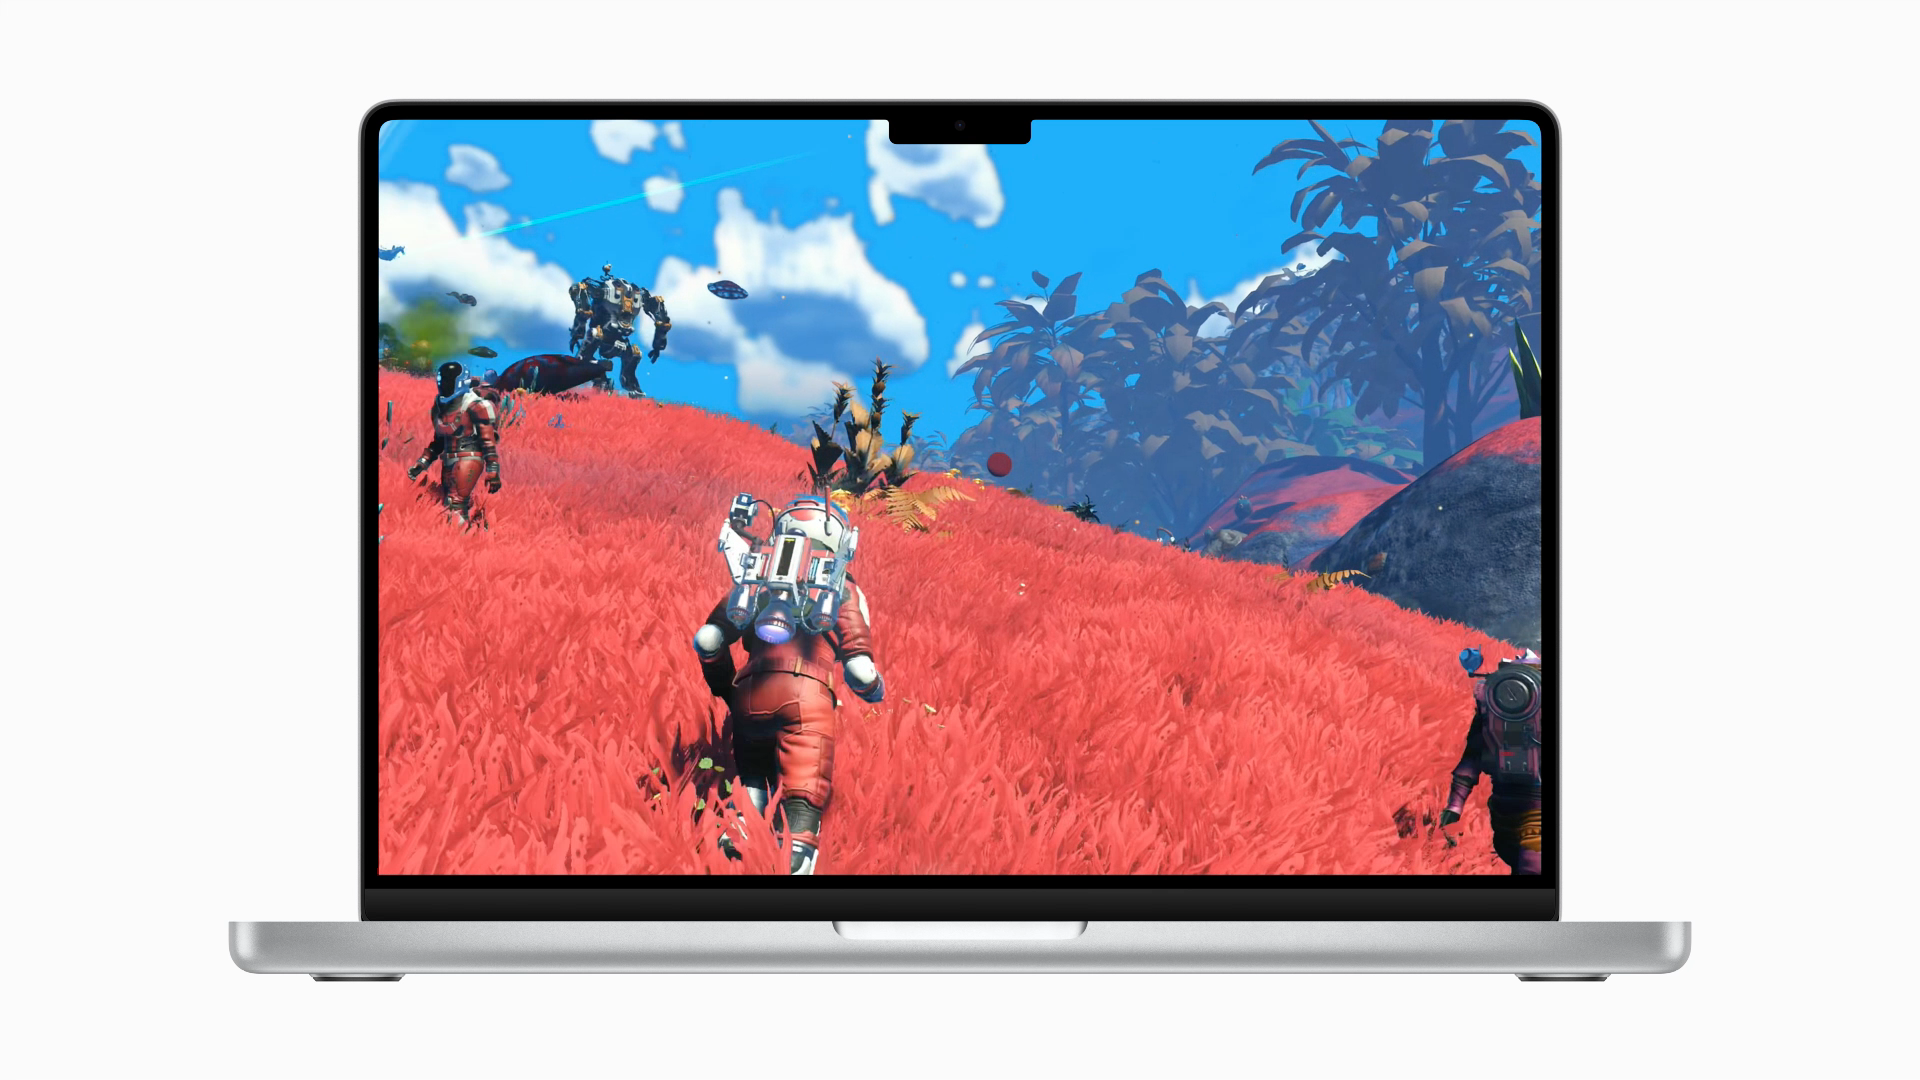 Apple MacBook with No Man's Sky on the screen